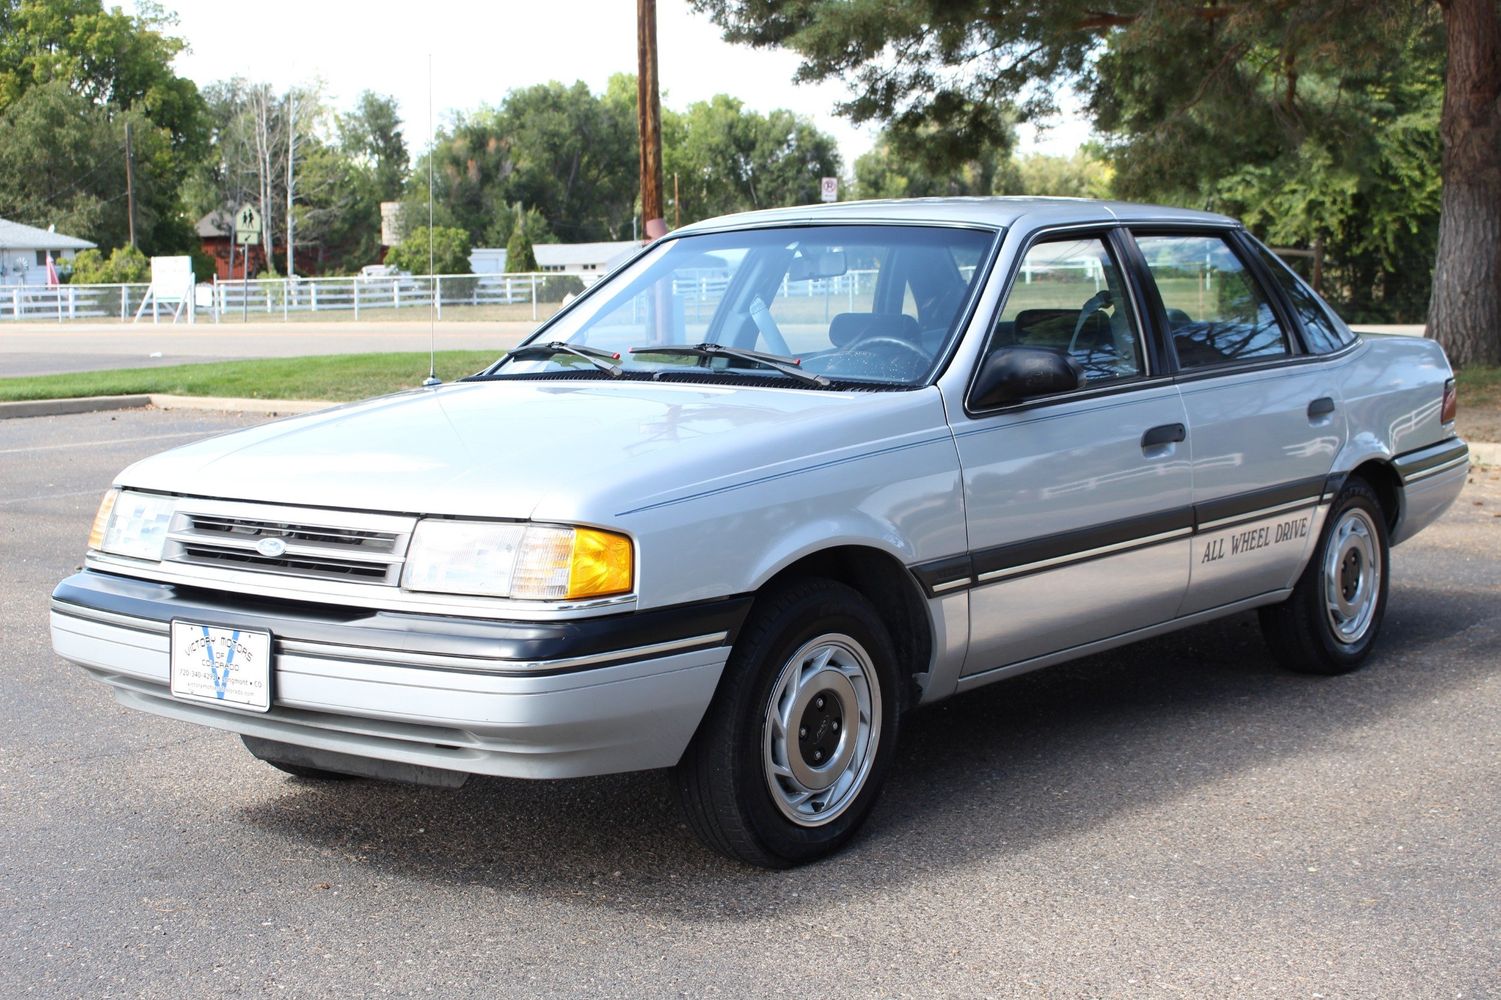 1988 Ford Tempo AWD | Victory Motors of Colorado